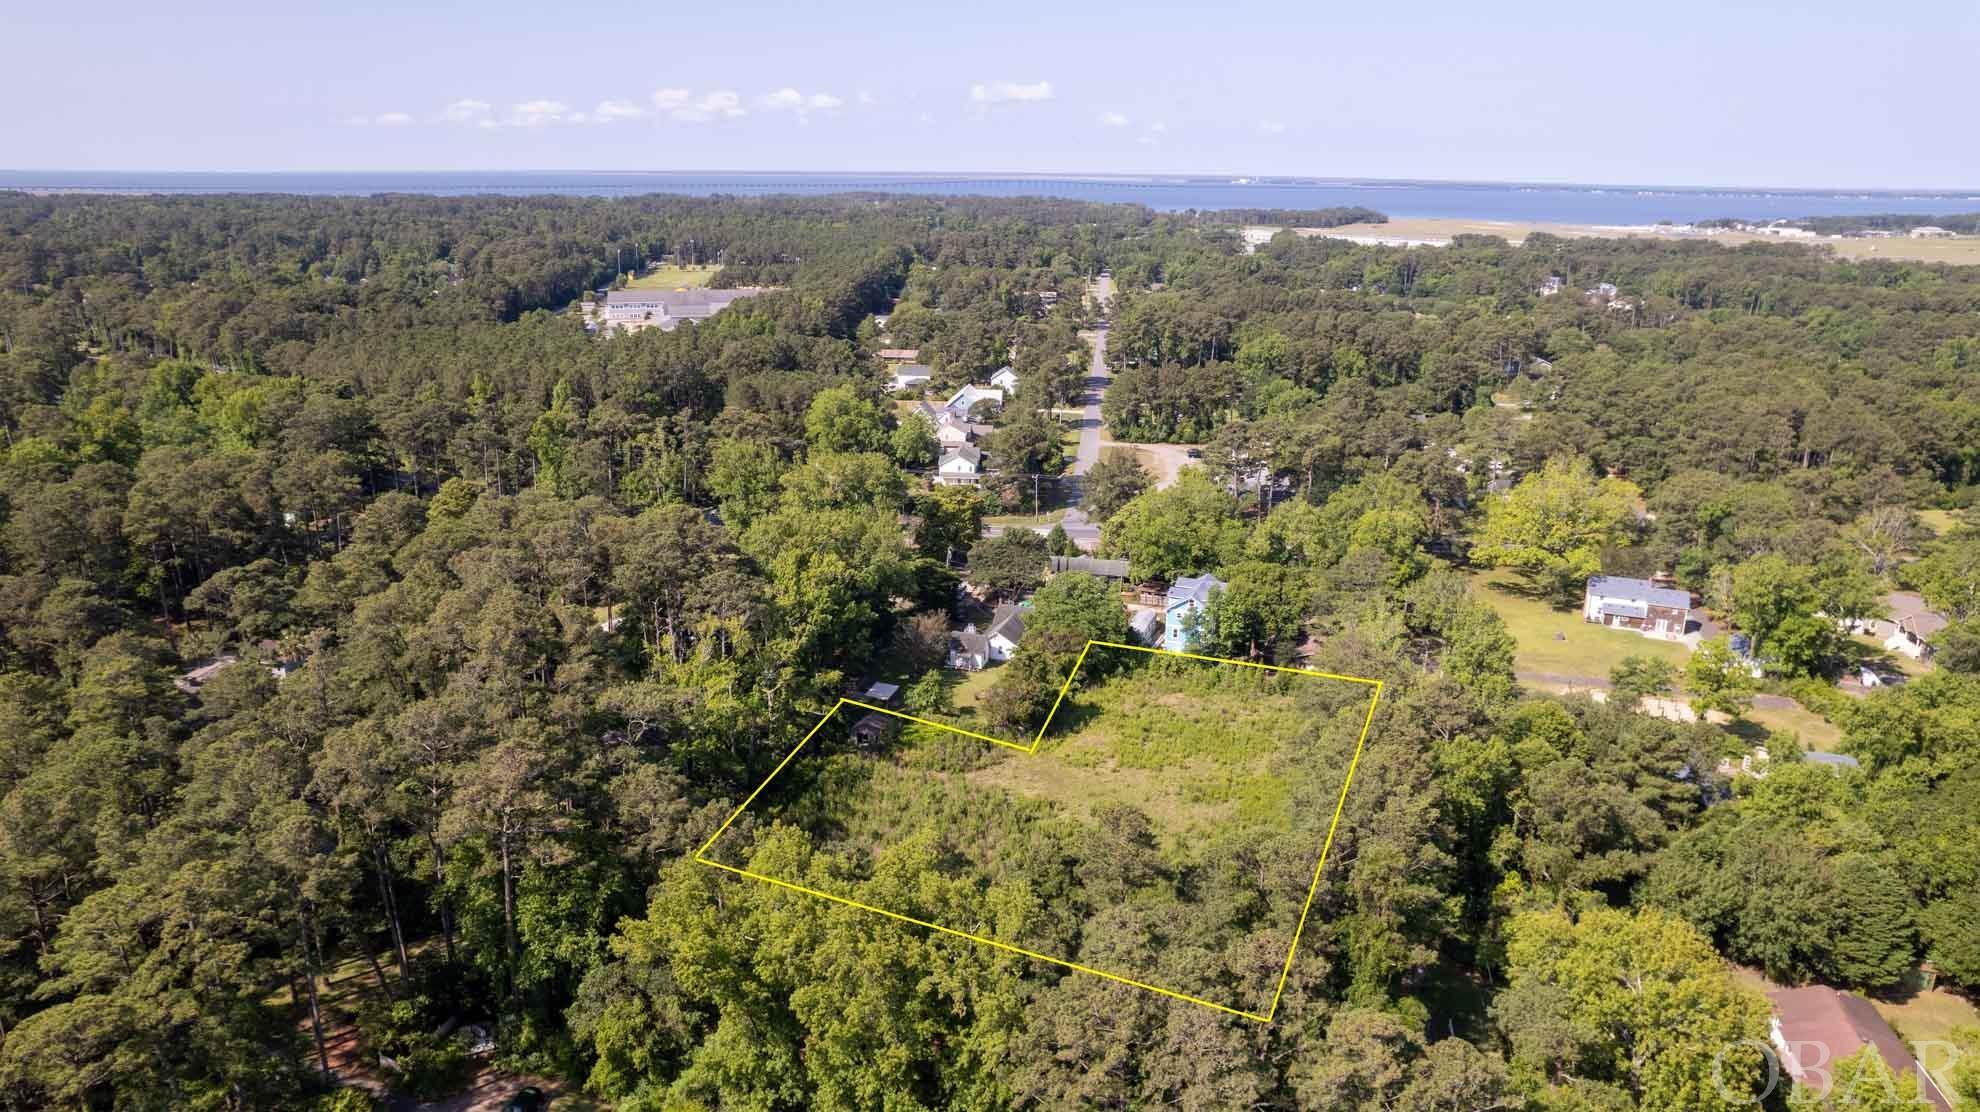 108 Rogers Road, Manteo, NC 27954, ,Lots/land,For sale,Rogers Road,125184